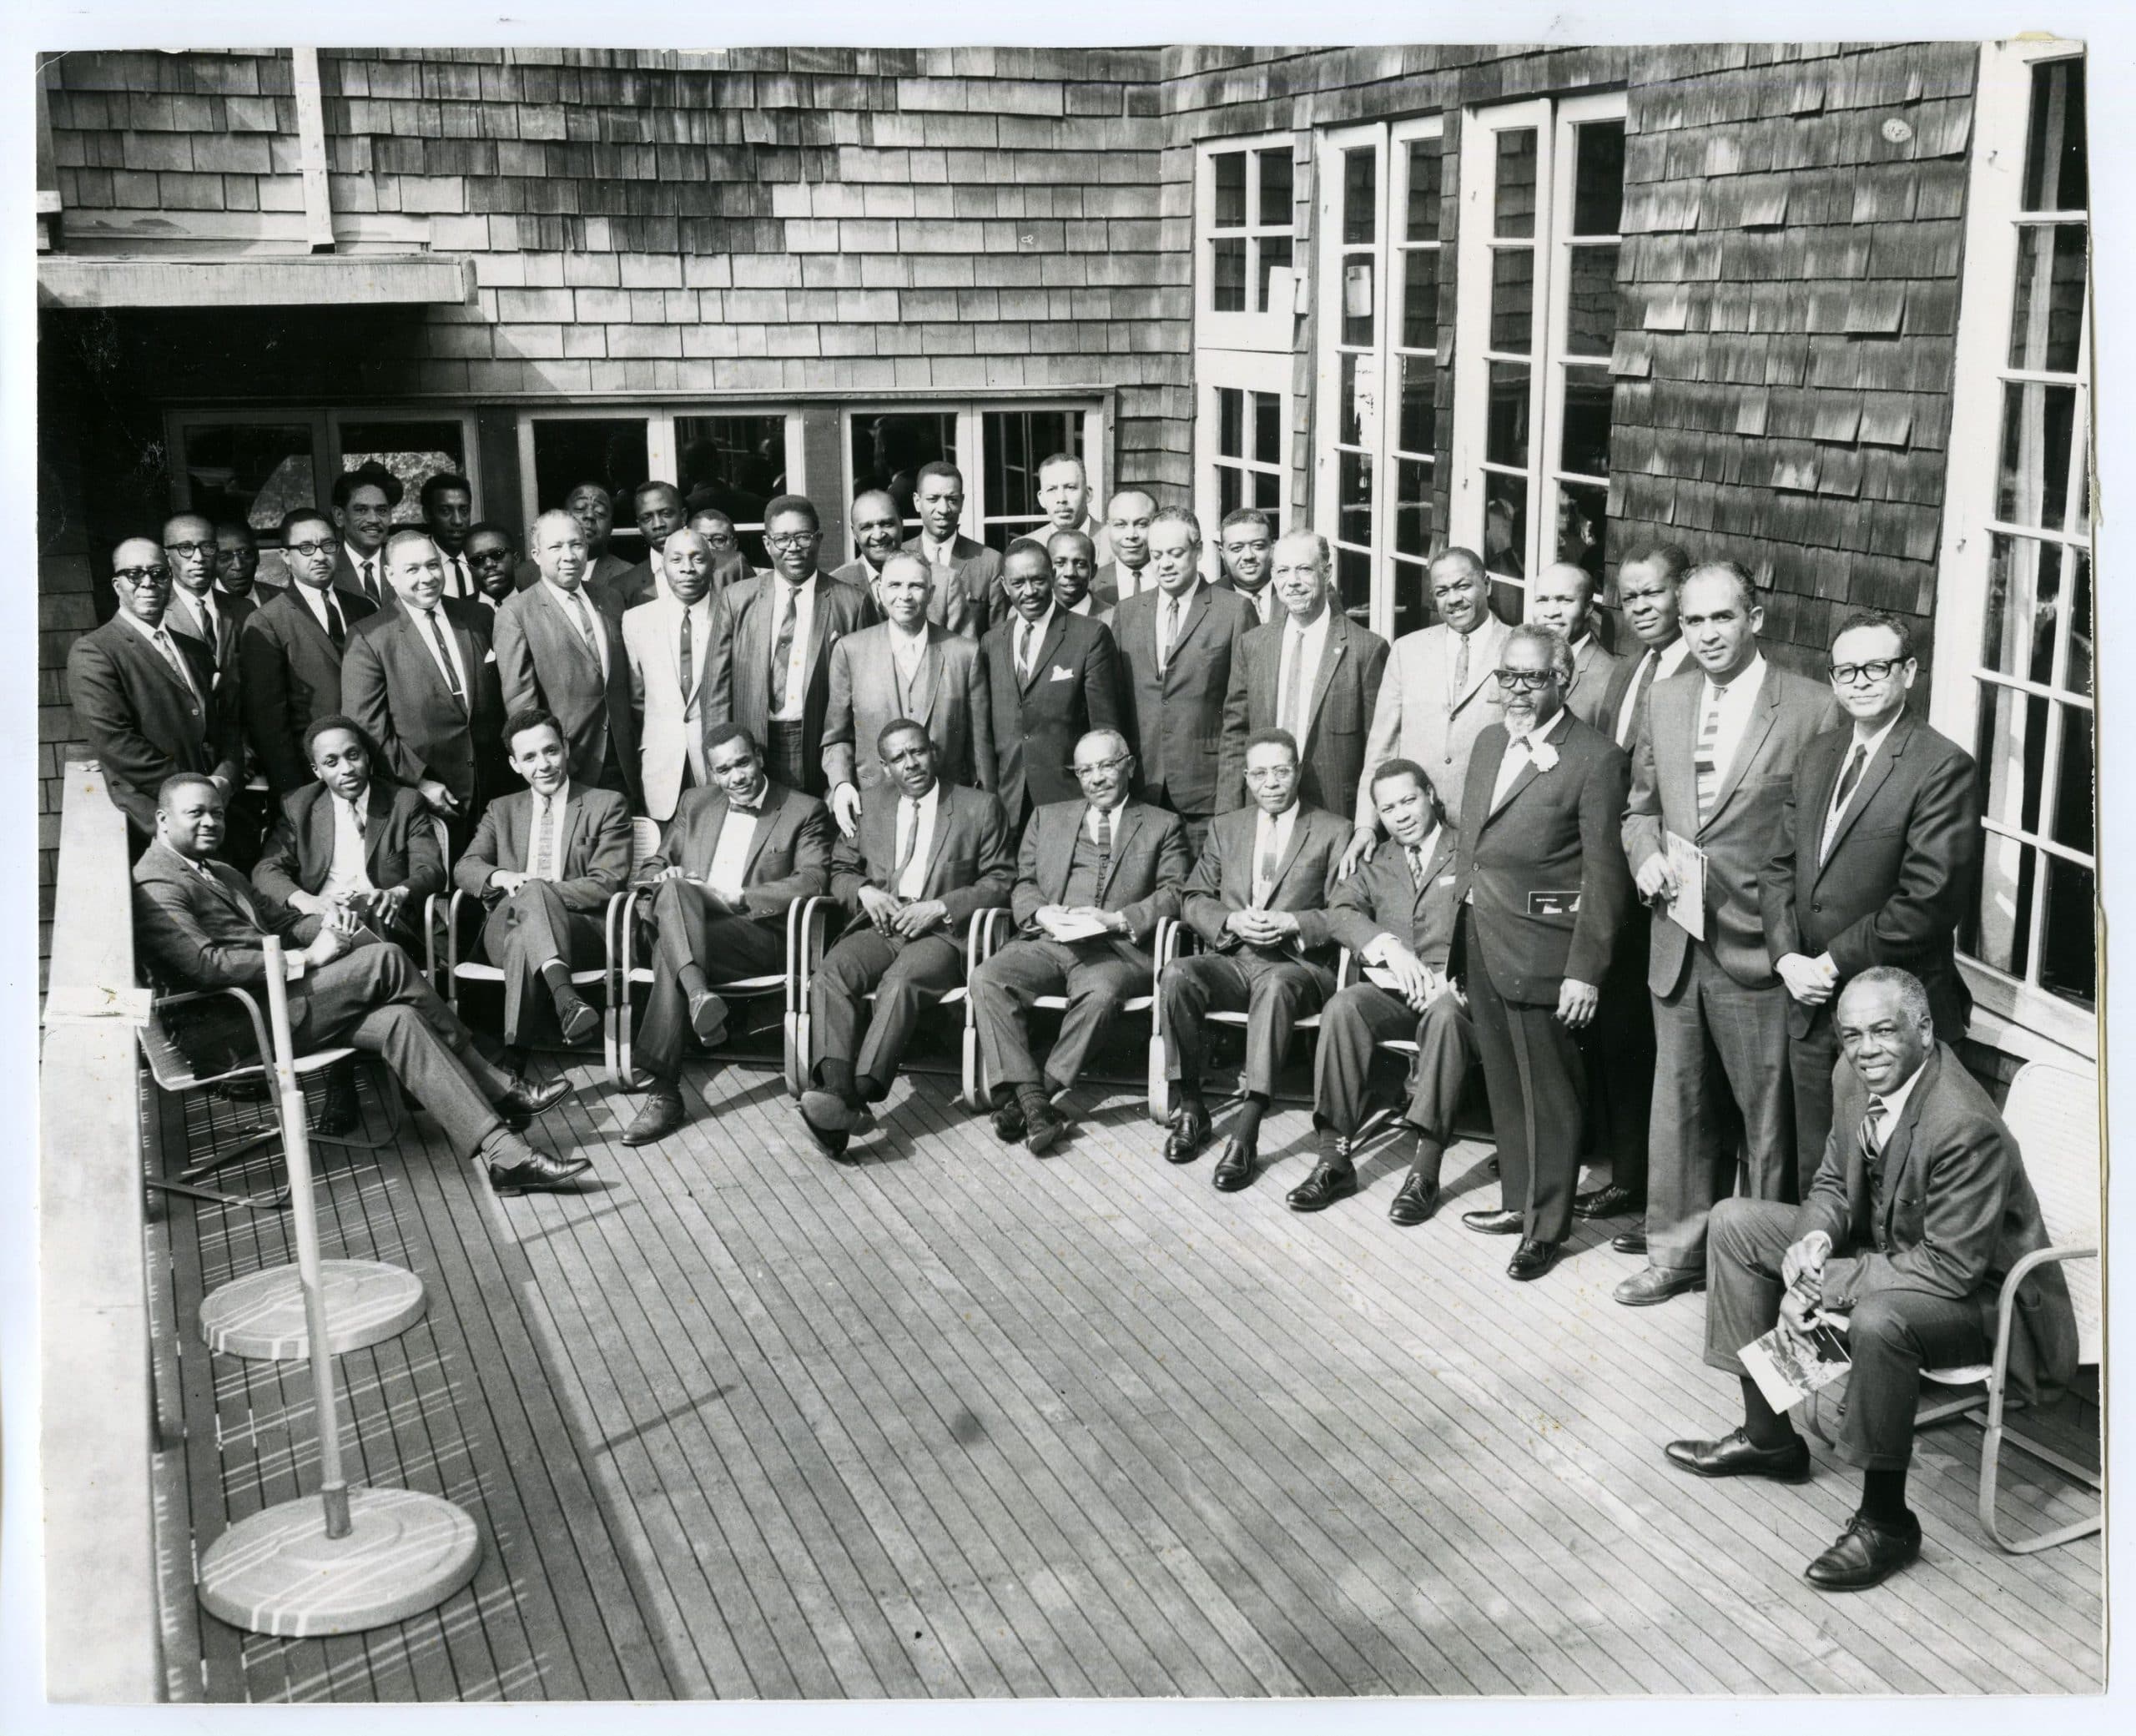 Men of Tomorrow at Community Relations luncheon, March 8, 1967 at Men's Faculty Club